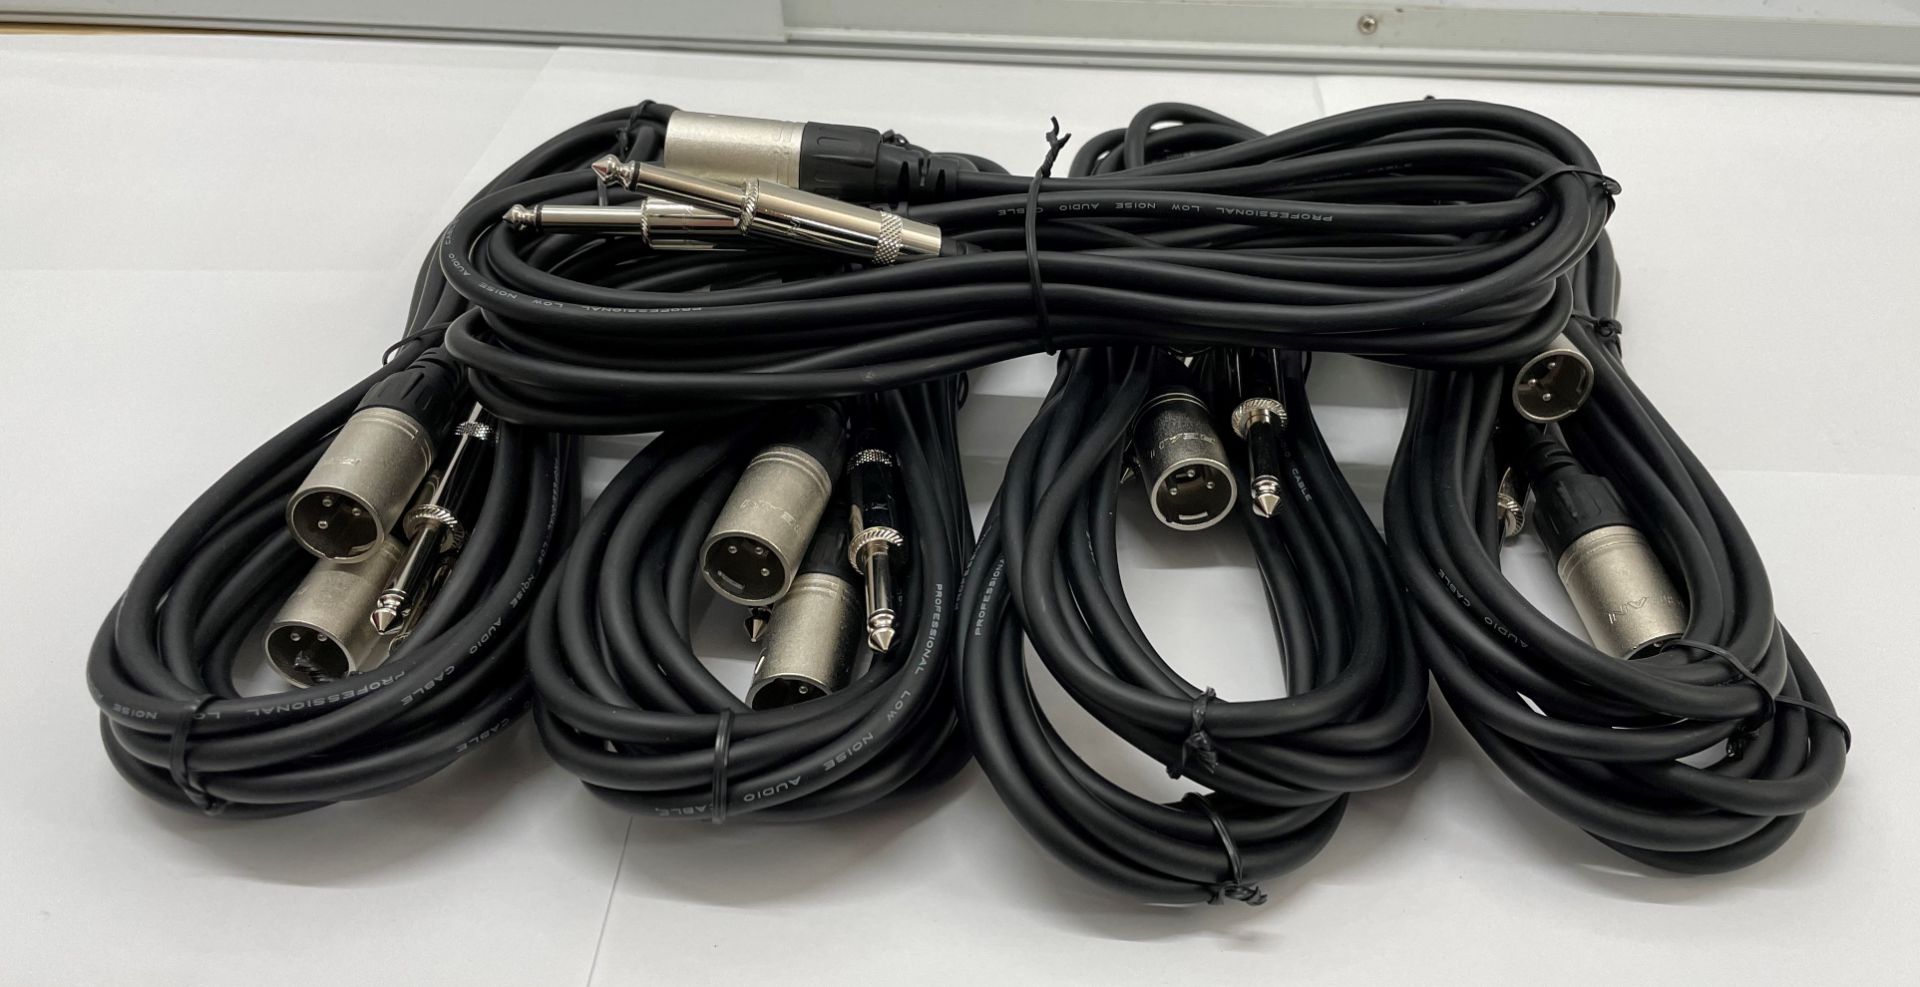 10-3 pin Male XLR to Mono 6.35mm Jack Plugs, 3m long (unused)-located at Pro Event Solutions, - Image 3 of 3